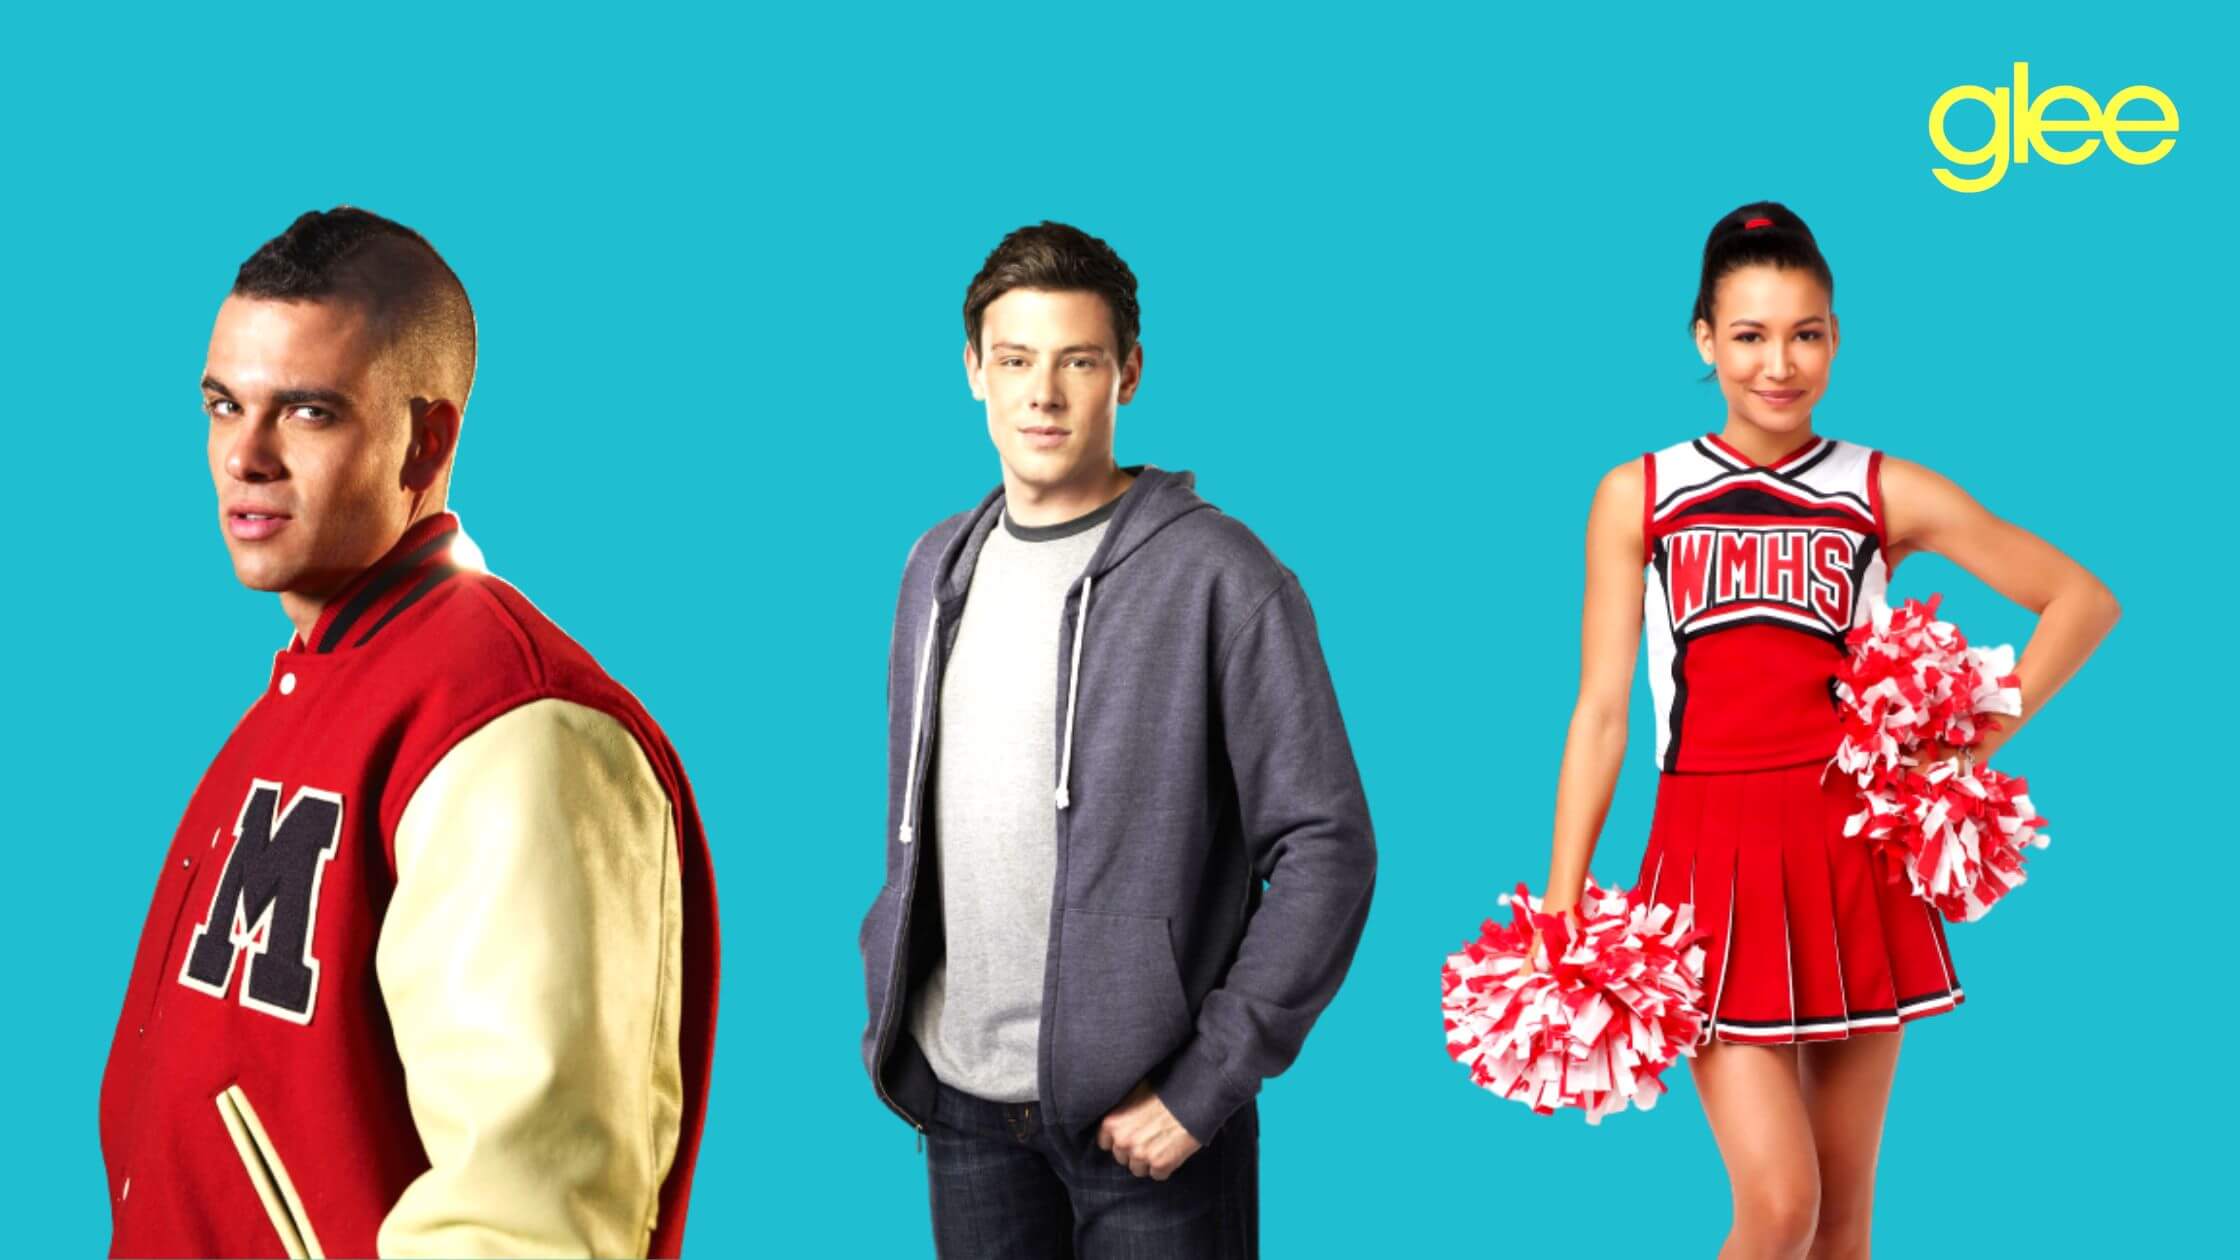 Death of the glee stars